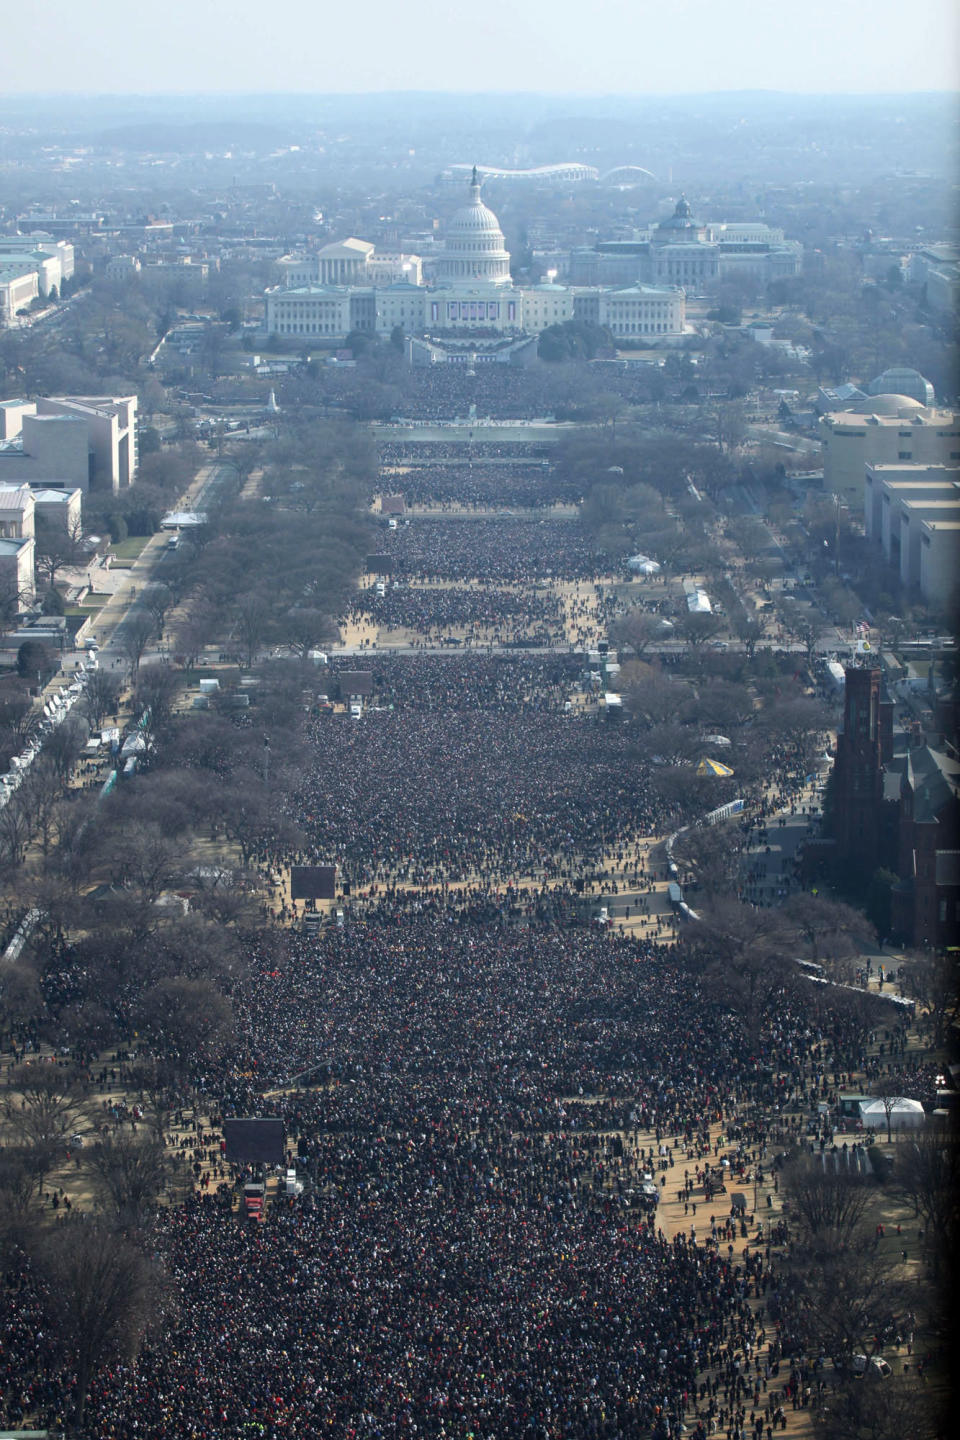 Spectators fill the National Mall for the inauguration of Barack Obama at the 44th U.S. President in Washington, D.C., Tuesday, January 20, 2009.